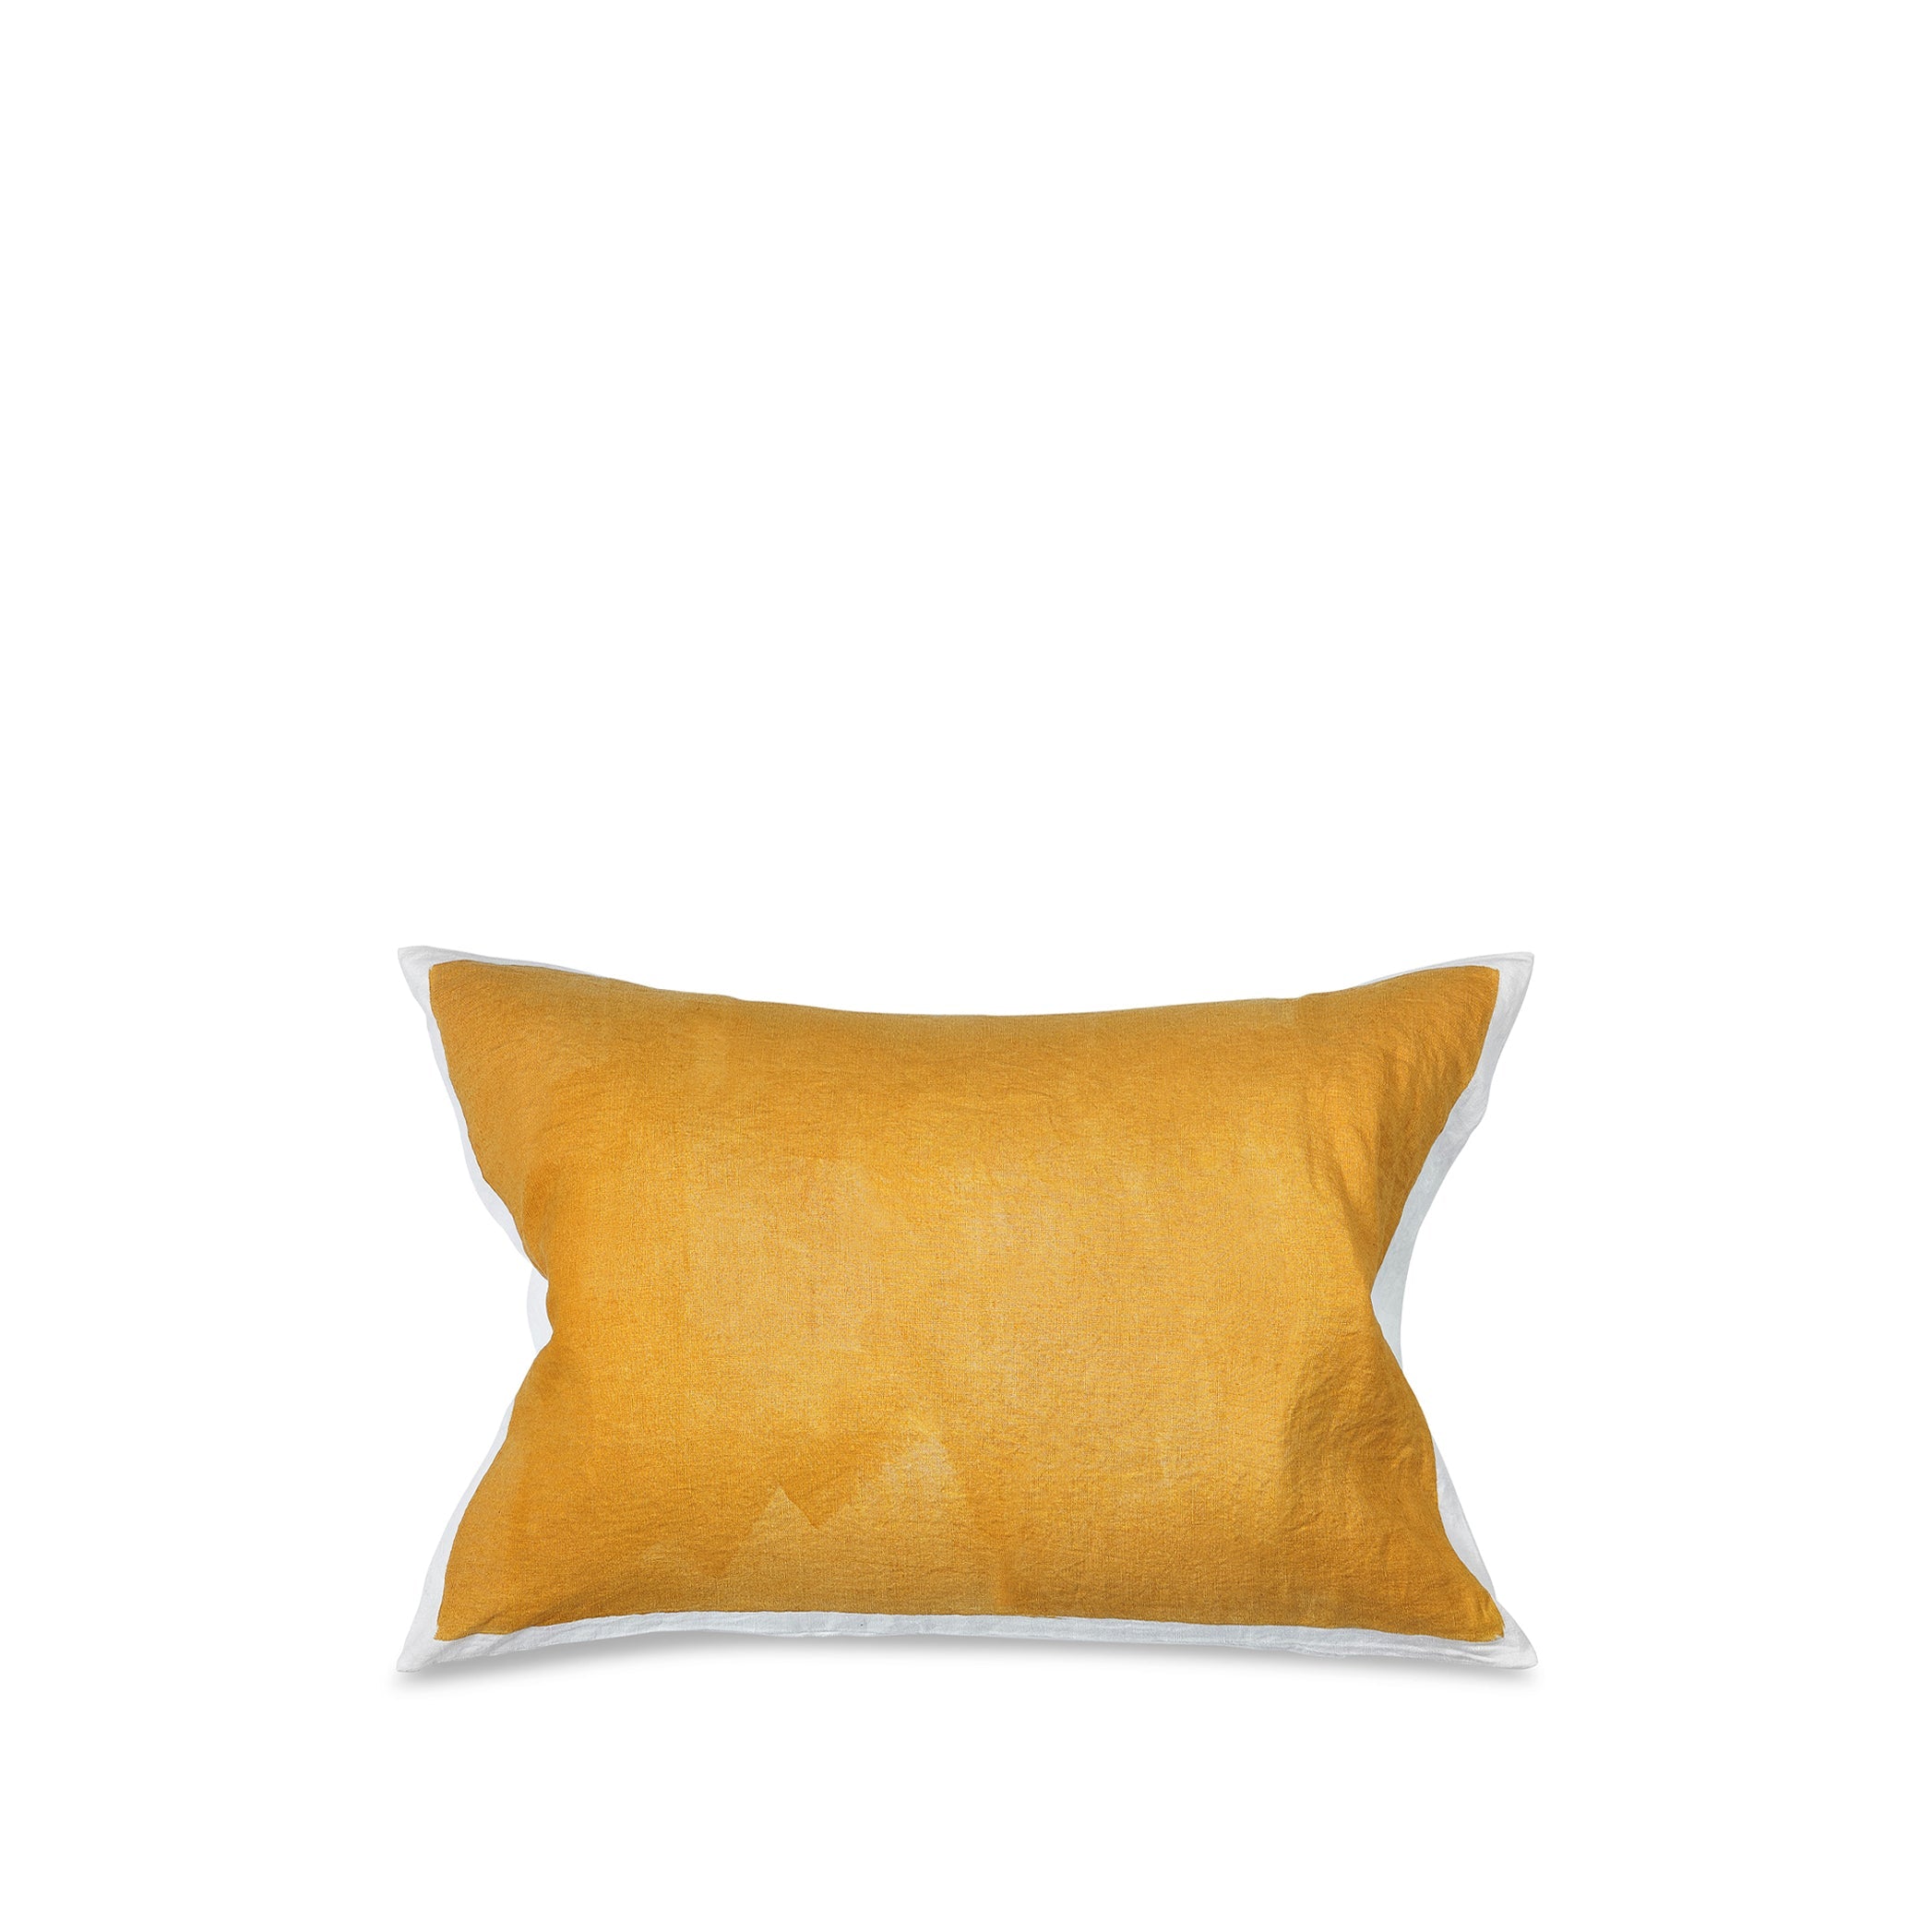 Hand Painted Linen Cushion in Mustard Yellow, 60cm x 40cm